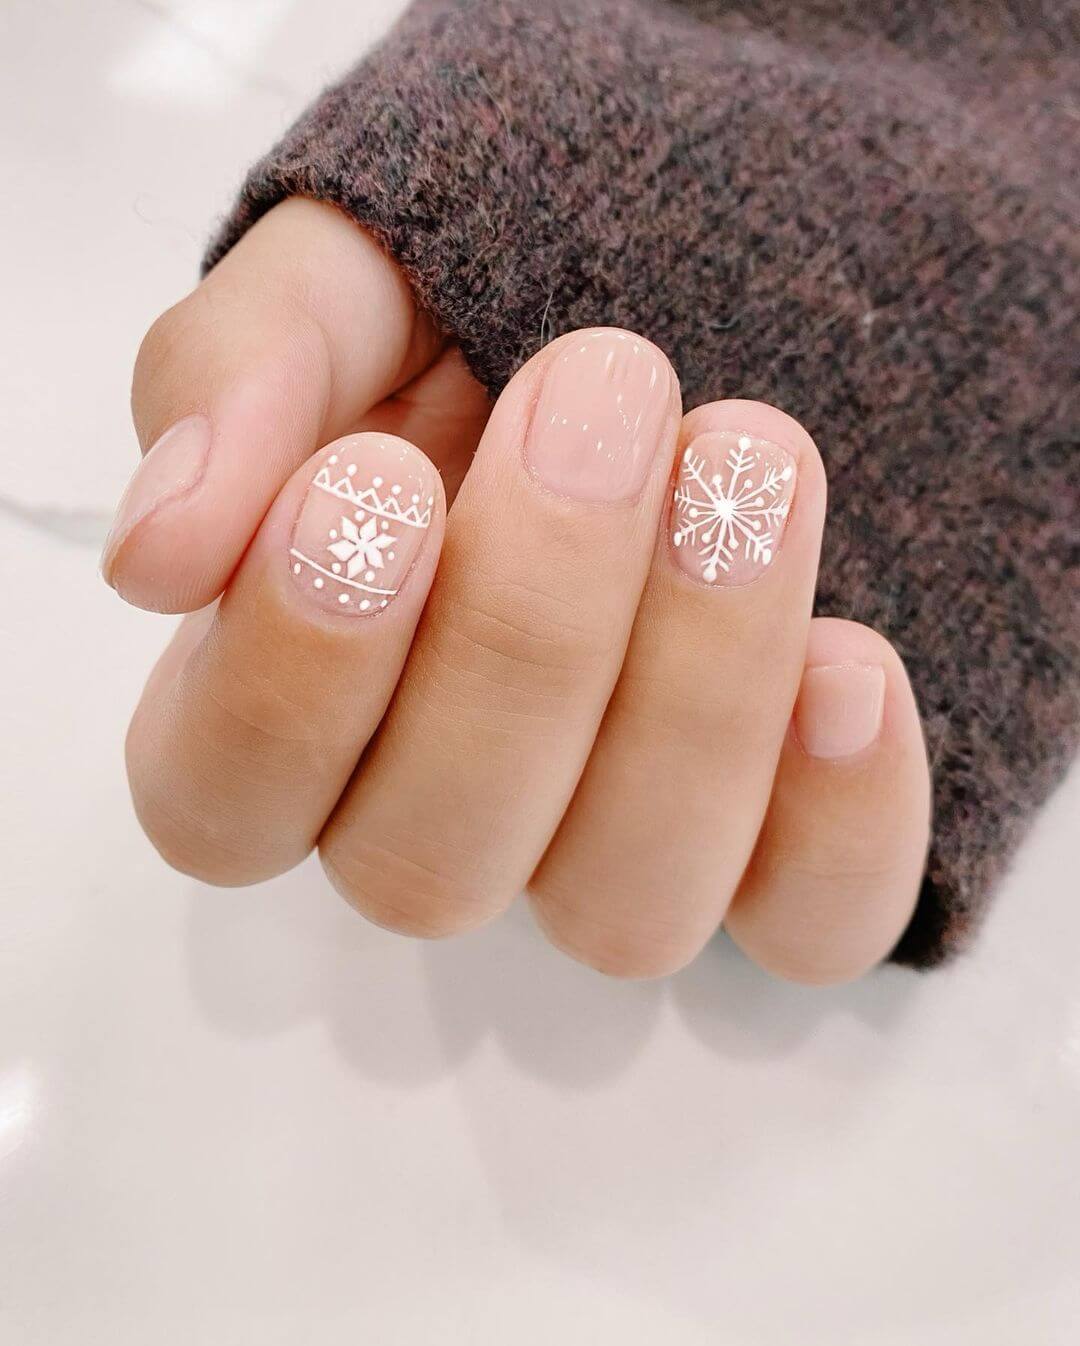  Winter Nail Art Winter portraying tattoos are the best